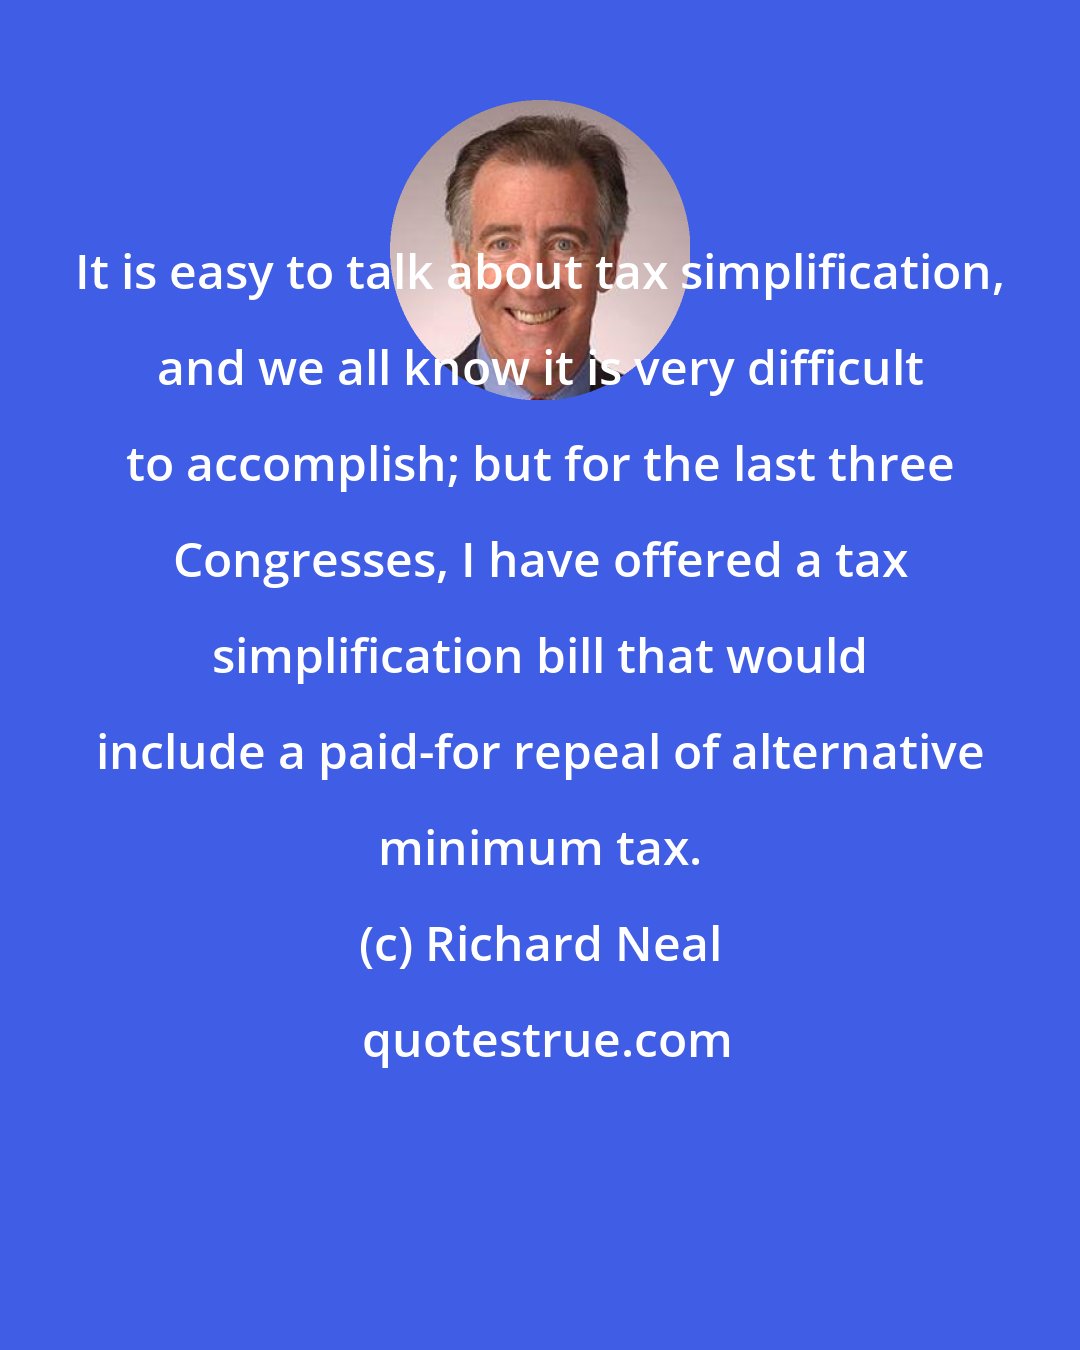 Richard Neal: It is easy to talk about tax simplification, and we all know it is very difficult to accomplish; but for the last three Congresses, I have offered a tax simplification bill that would include a paid-for repeal of alternative minimum tax.